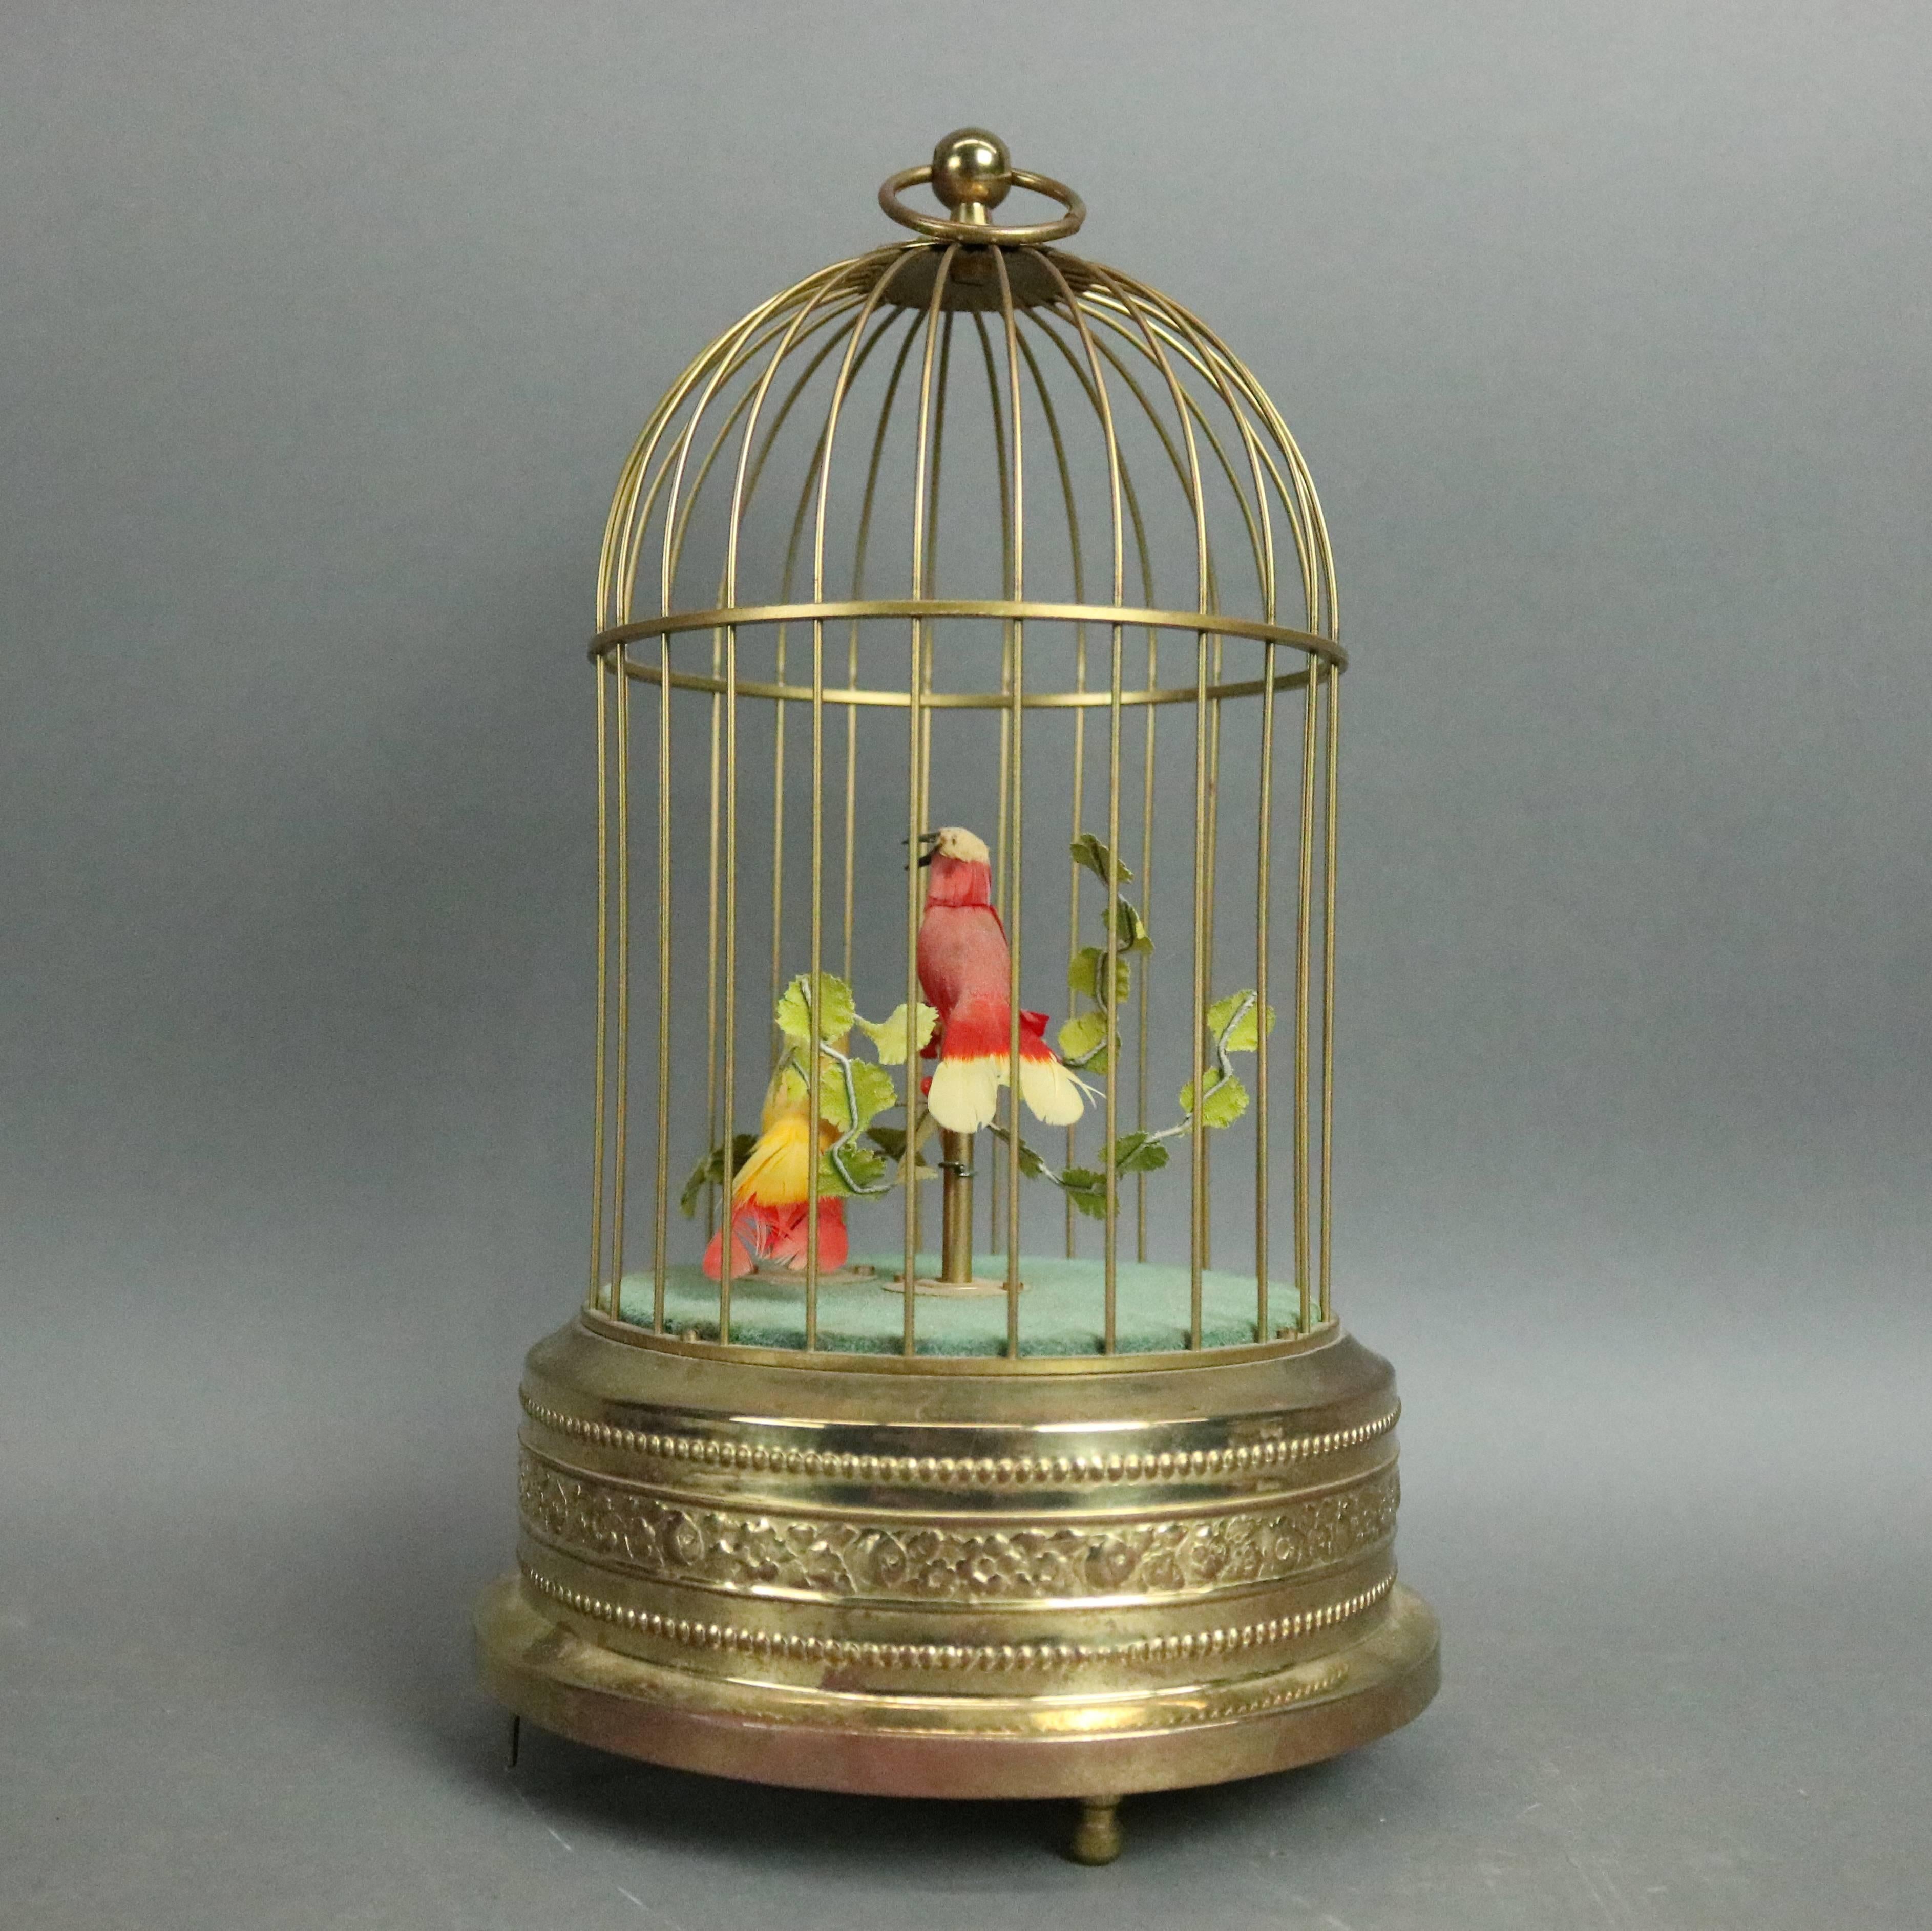 Vintage West German music box features brass bird cage with beaded and floral design, interior animated birds chirp and move their heads and tails in time to the music, base has original West Germany label and Stop Pause Start control, circa